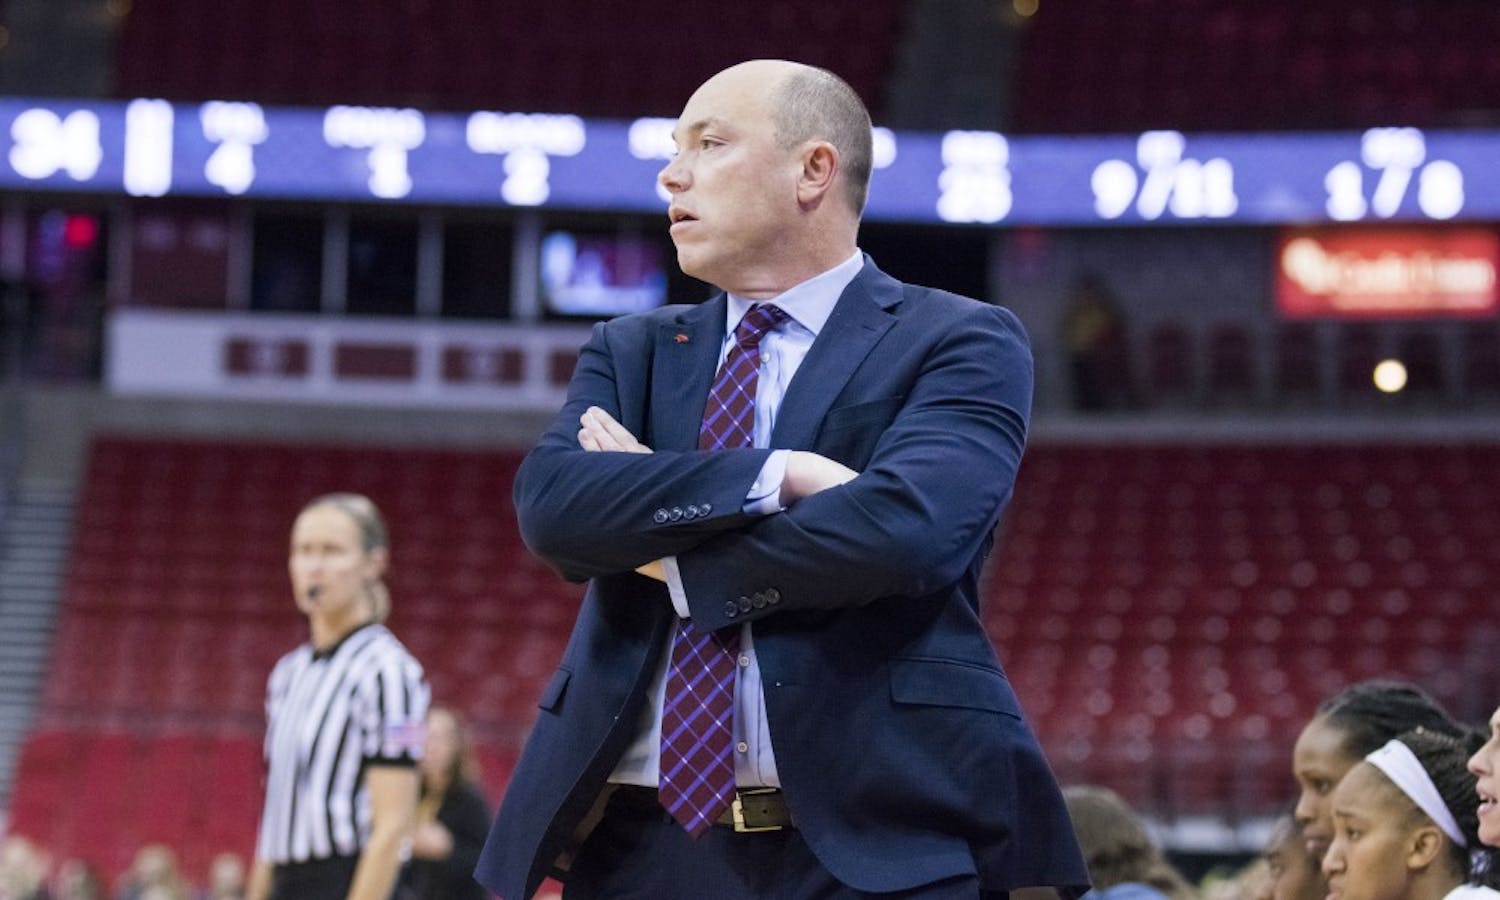 The Badgers finished 15-18 last year, an improvement from previous seasons under head coach Jonathan Tsipis. UW will look to improve that record this year starting with their opener Tuesday night.&nbsp;